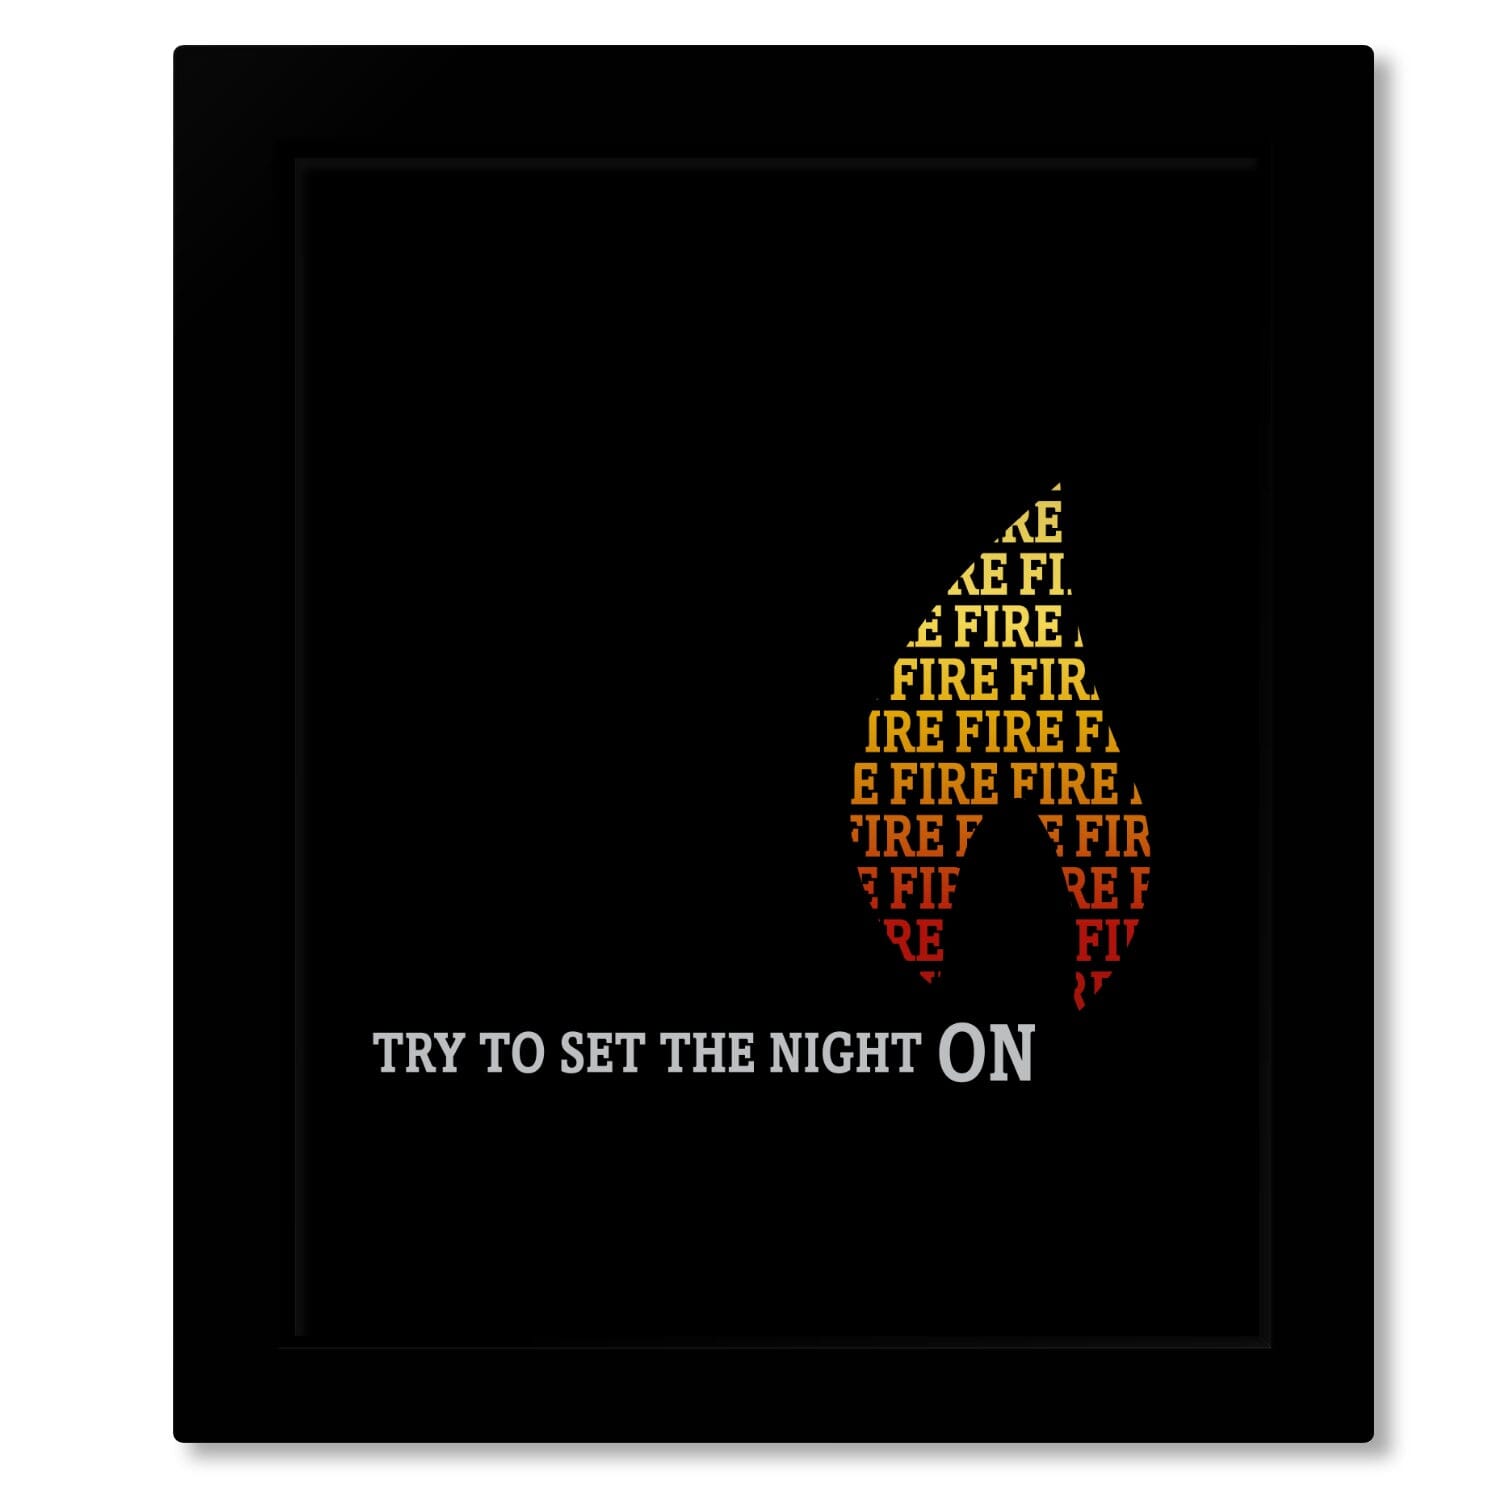 Light my Fire by The Doors - 60s Song Lyric Music Poster Art Song Lyrics Art Song Lyrics Art 8x10 Framed Print (without mat) 